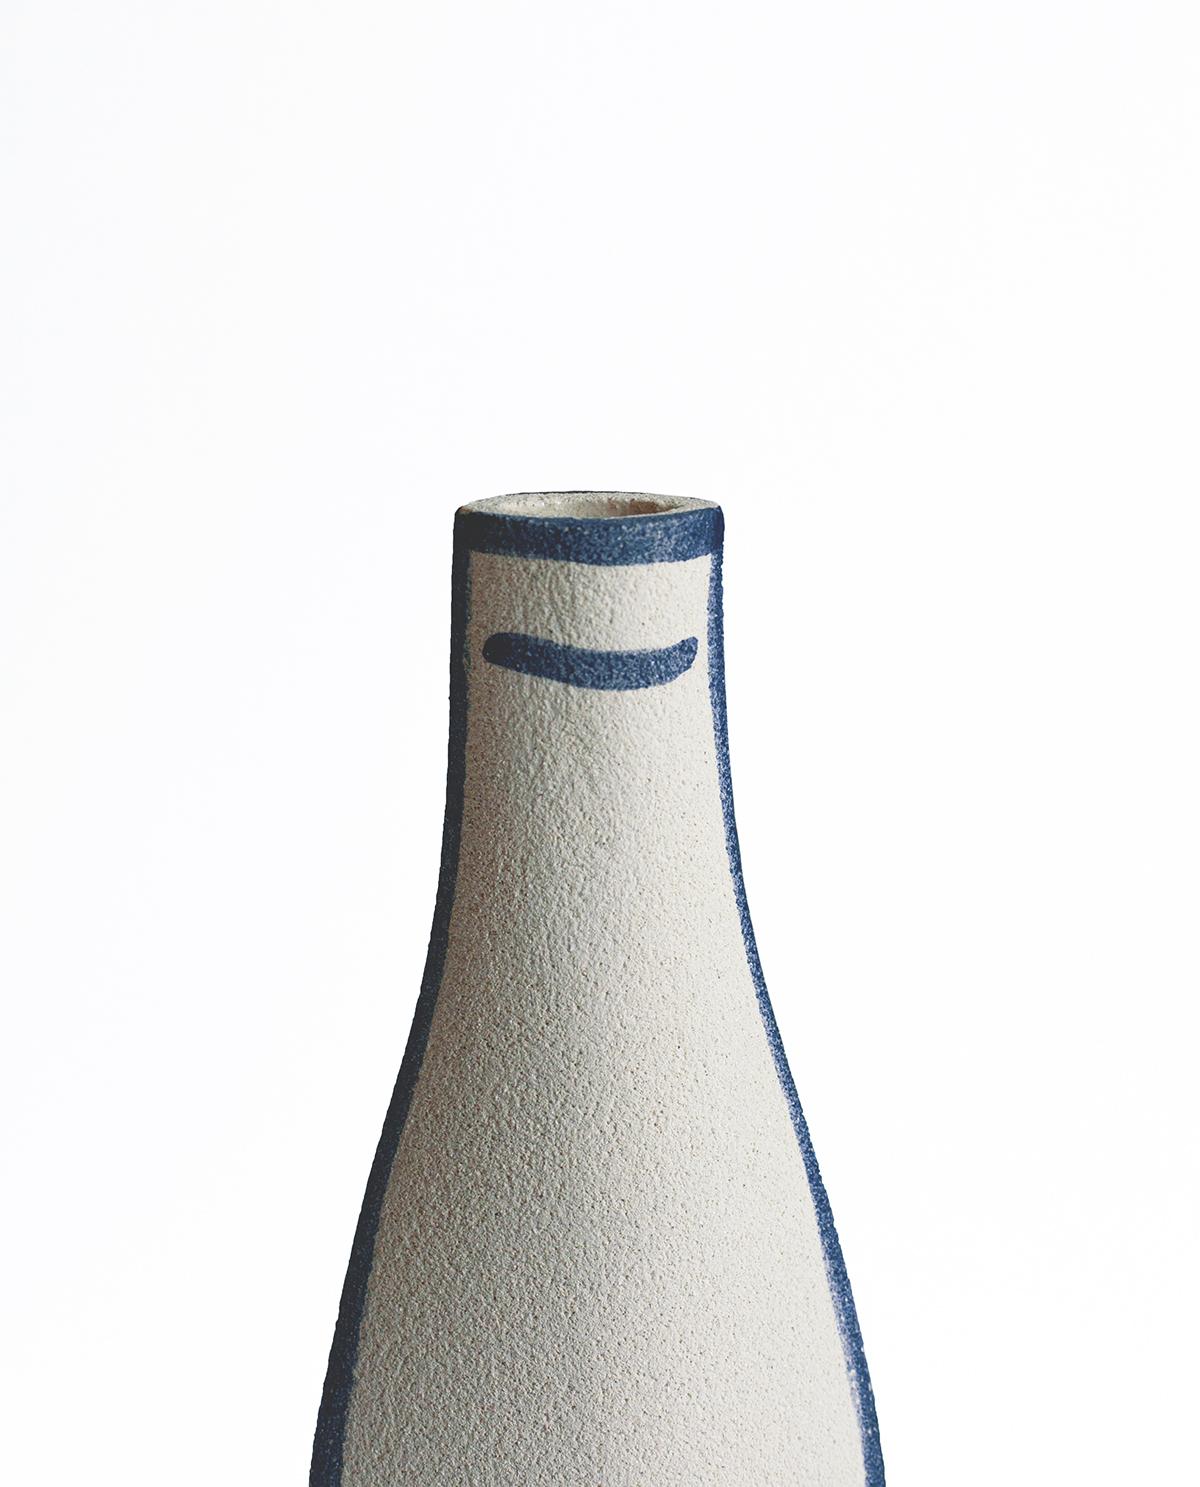 Minimalist 21st Century ‘Morandi Bouteille - Blue’, in White Ceramic, Crafted in France For Sale